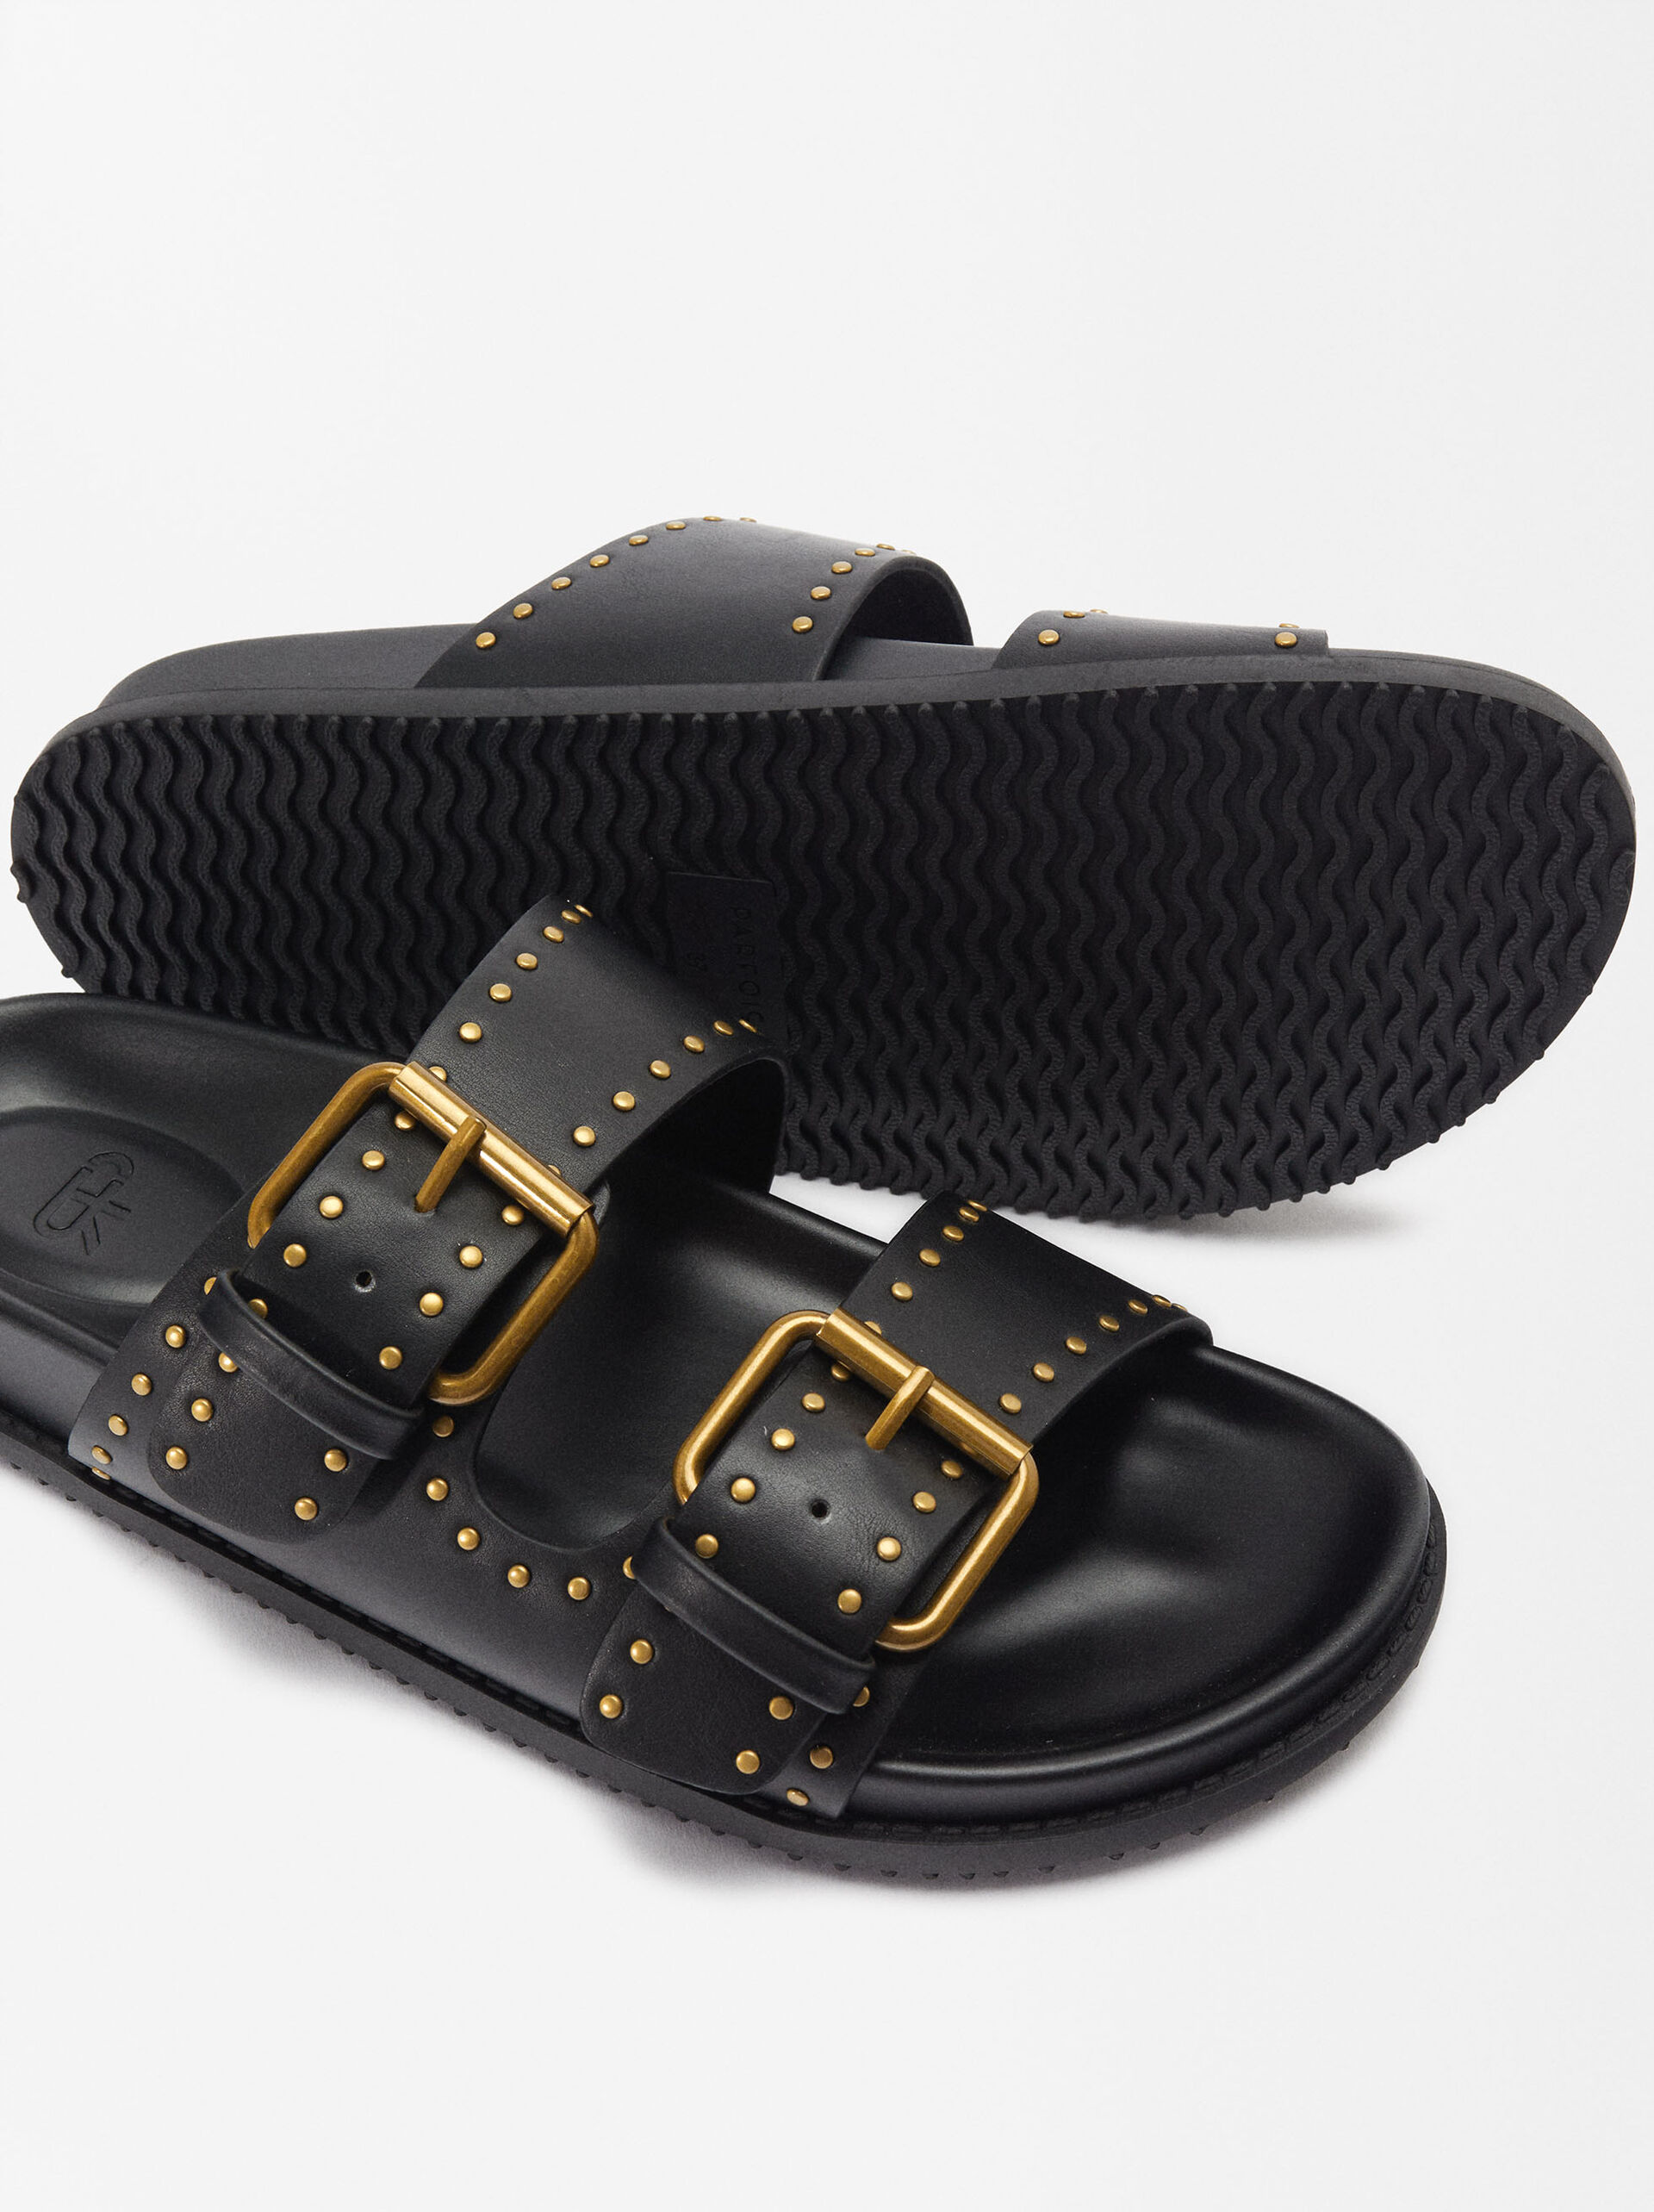 Flat Sandals With Buckles And Studs image number 4.0